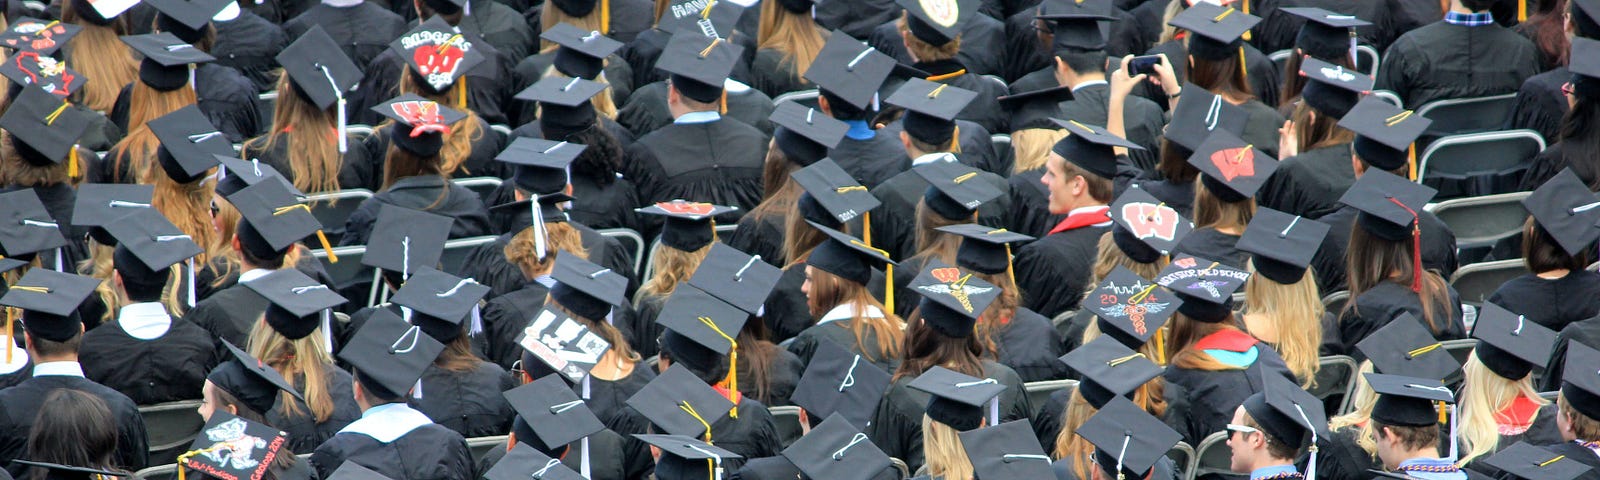 photograph of a group of graduates from above at their graduation ceremony